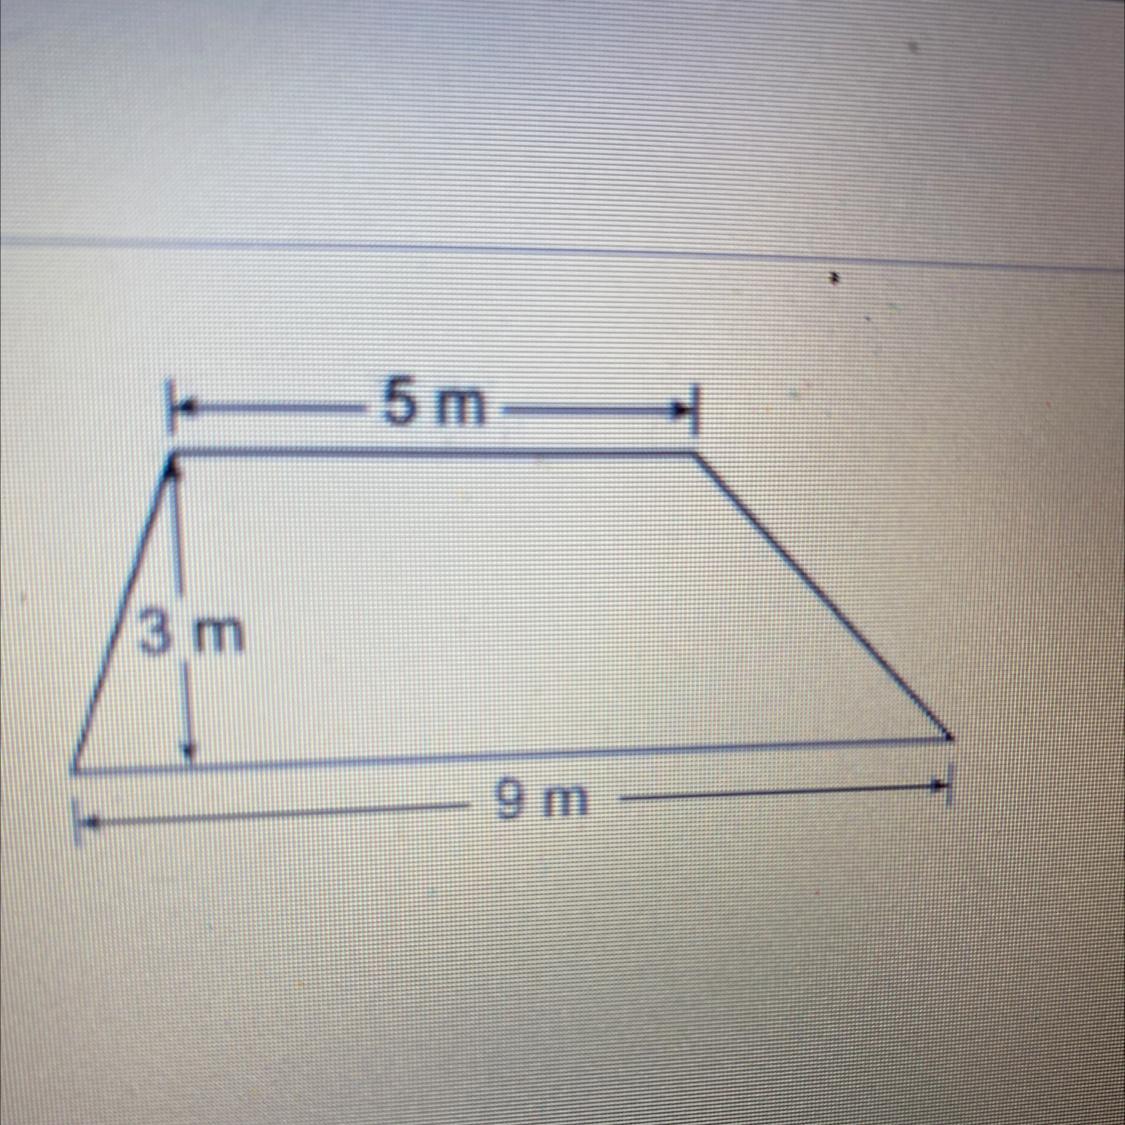 A Trapezoid Is ShownWhat Is The Area Of The Trapezoid?A)21 M2ingB)27 M2O34 M2D)42 M2